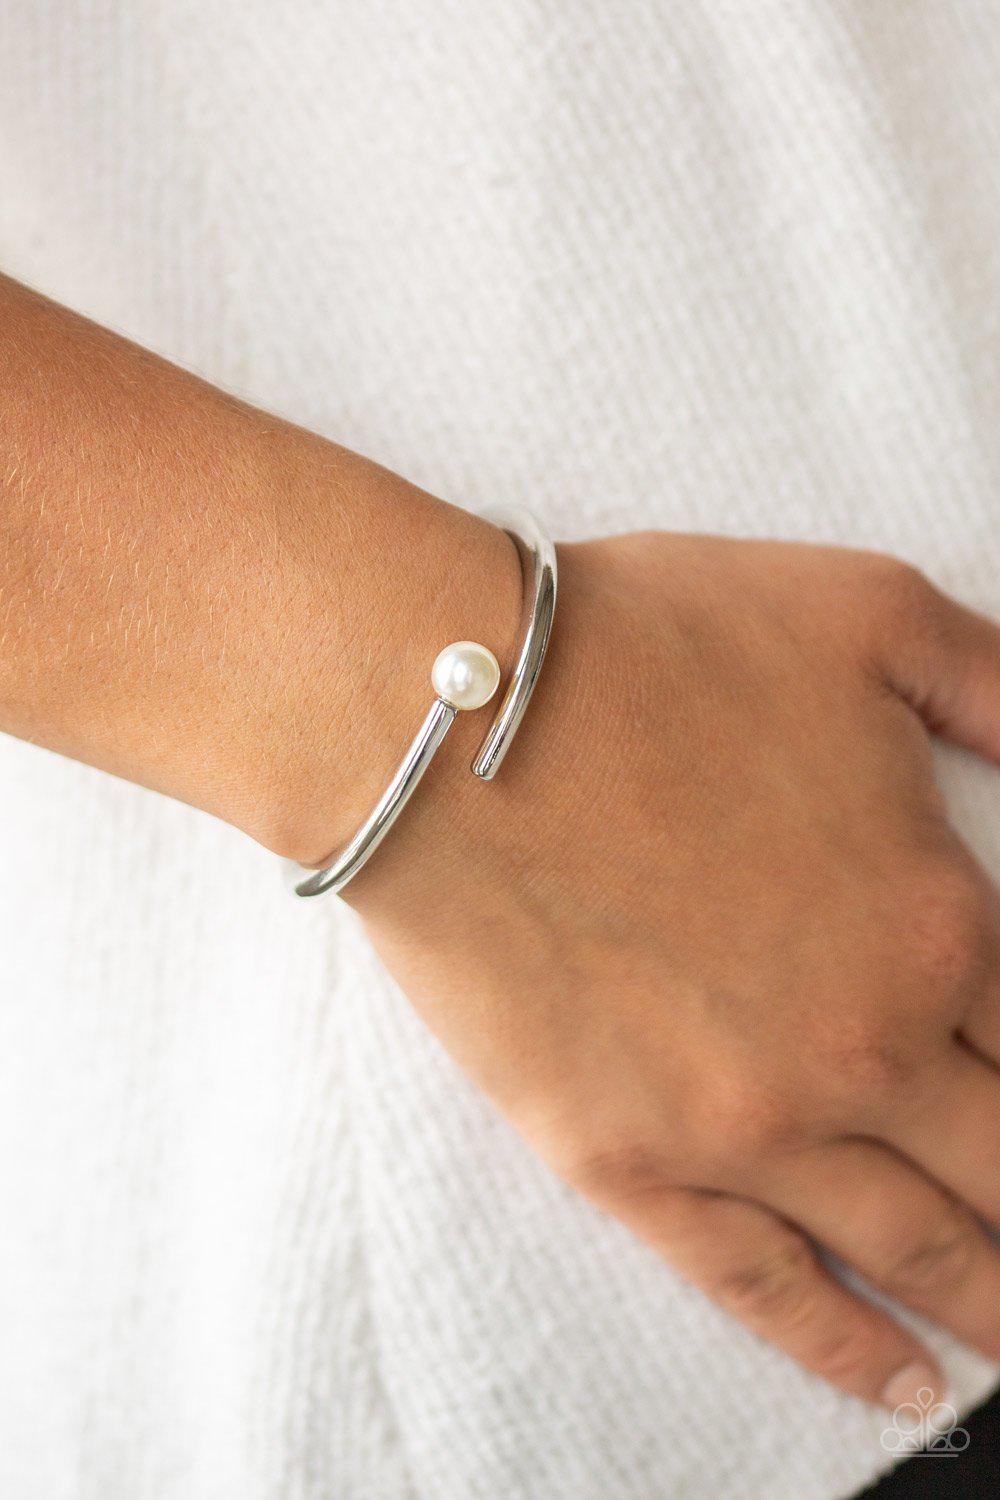 Industrial Impact Silver and White Spring Hinge Bracelet - Paparazzi Accessories-CarasShop.com - $5 Jewelry by Cara Jewels